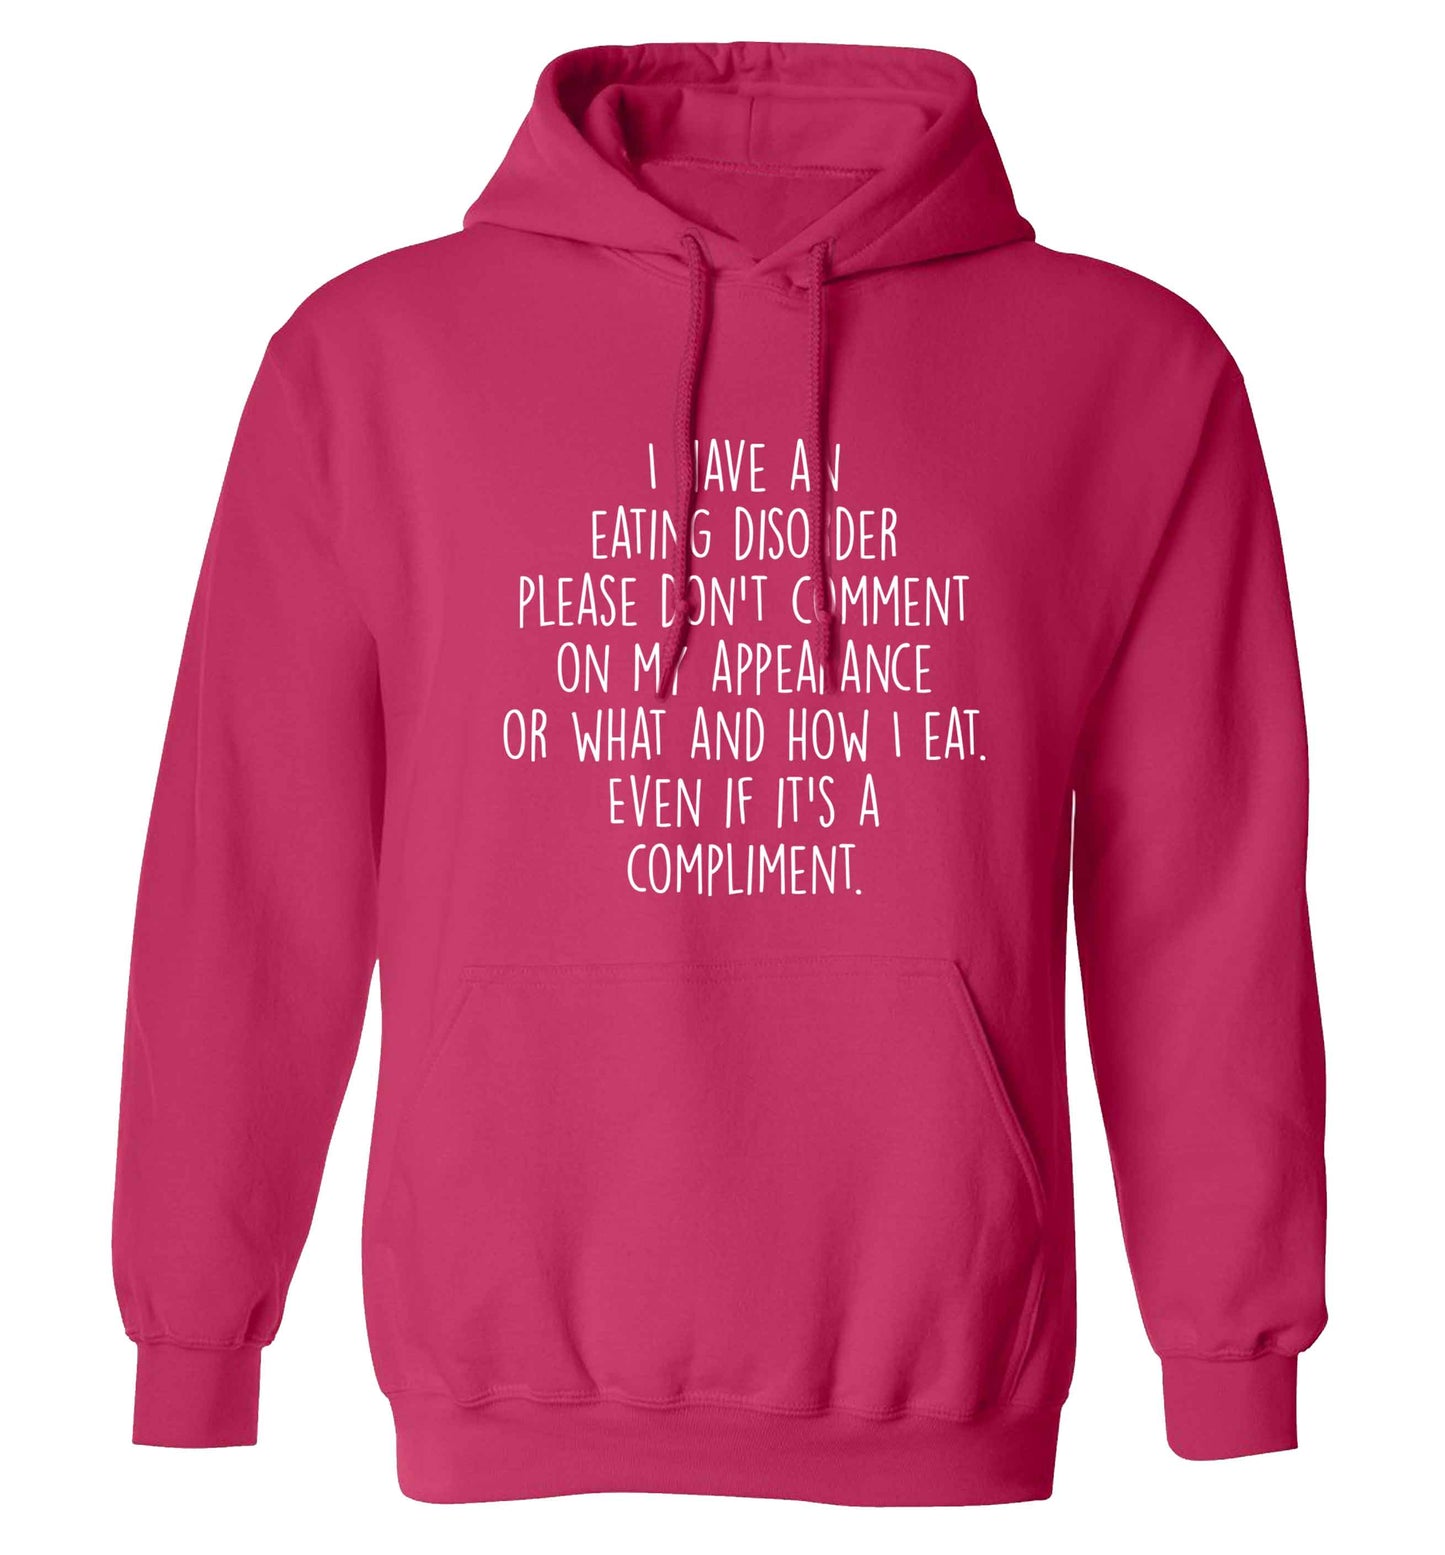 I have an eating disorder please don't comment on my appearance or what and how I eat. Even if it's a compliment adults unisex pink hoodie 2XL